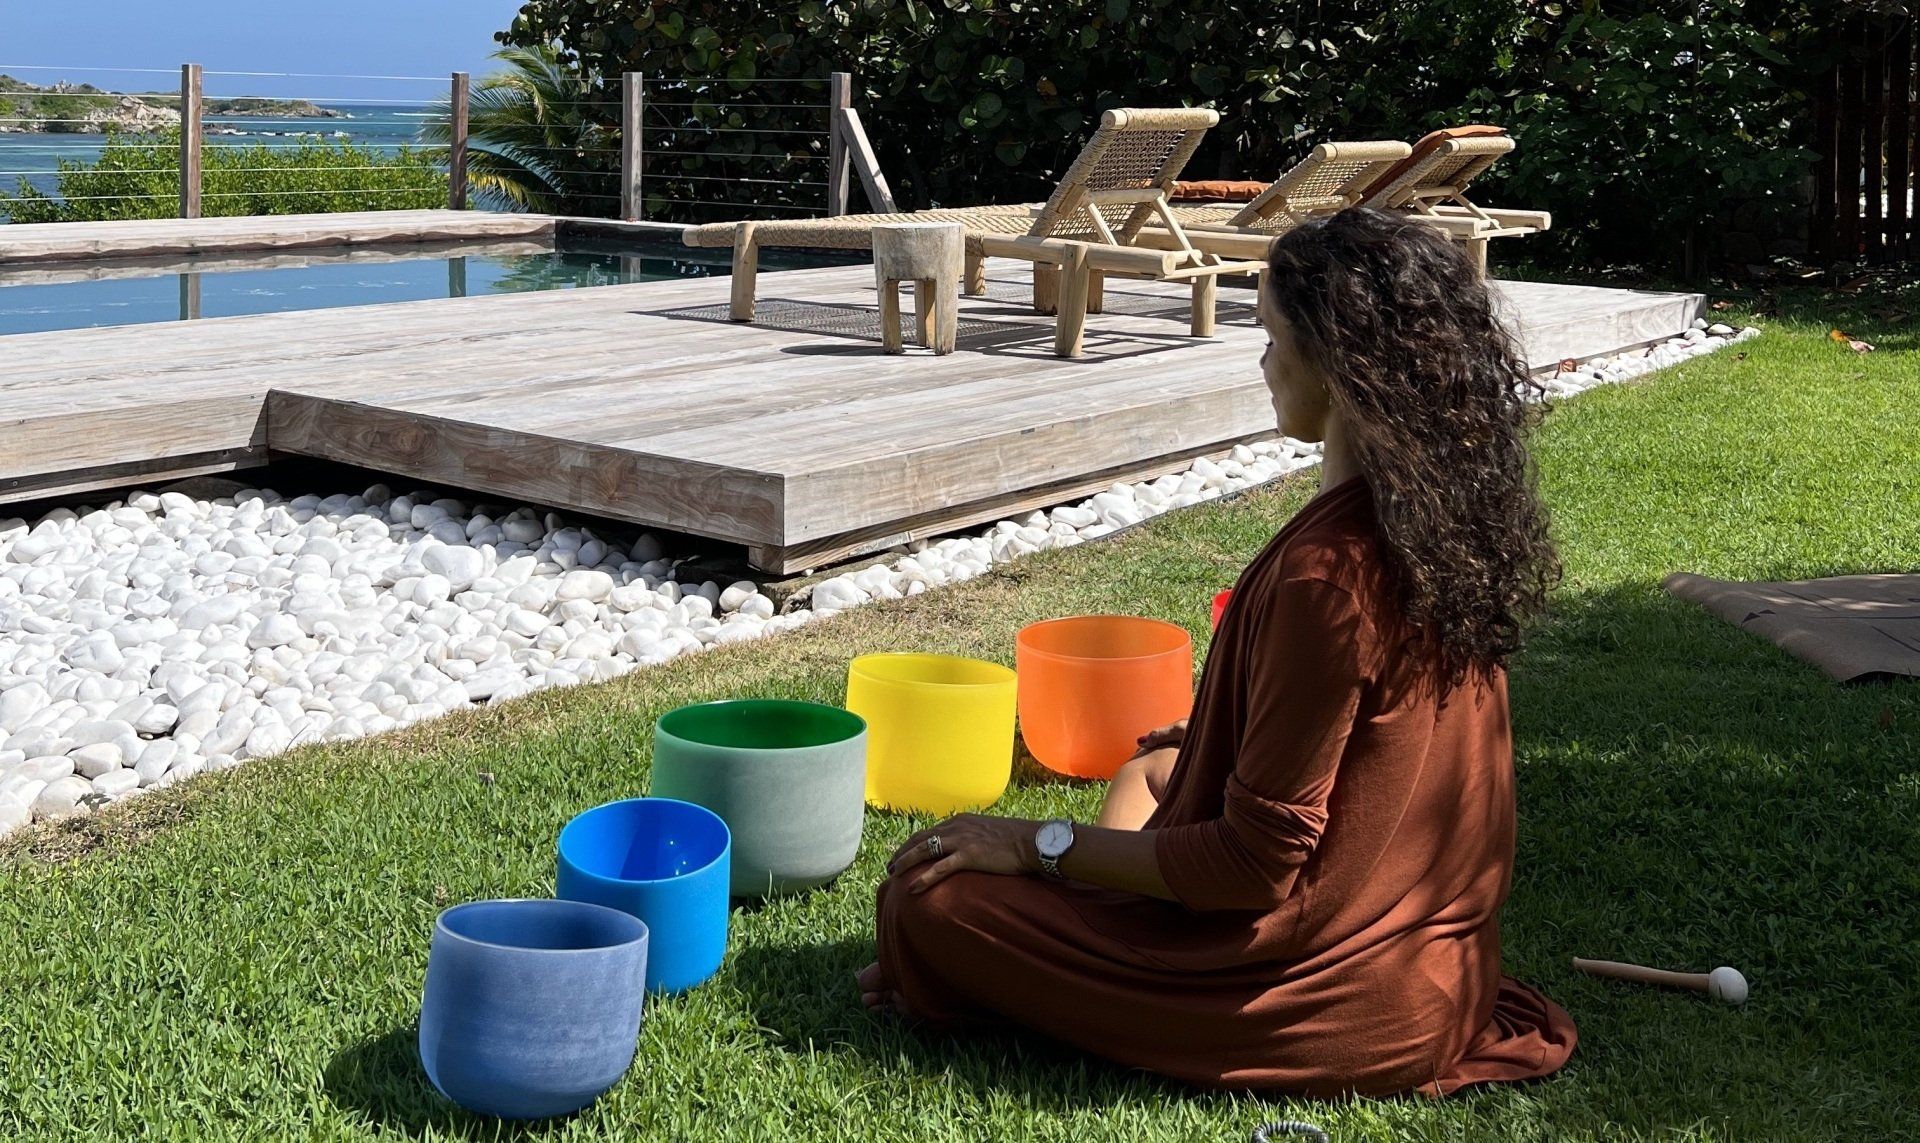 St Martin - Yoga Retreat in the Caribbean, singing bowls and meditation